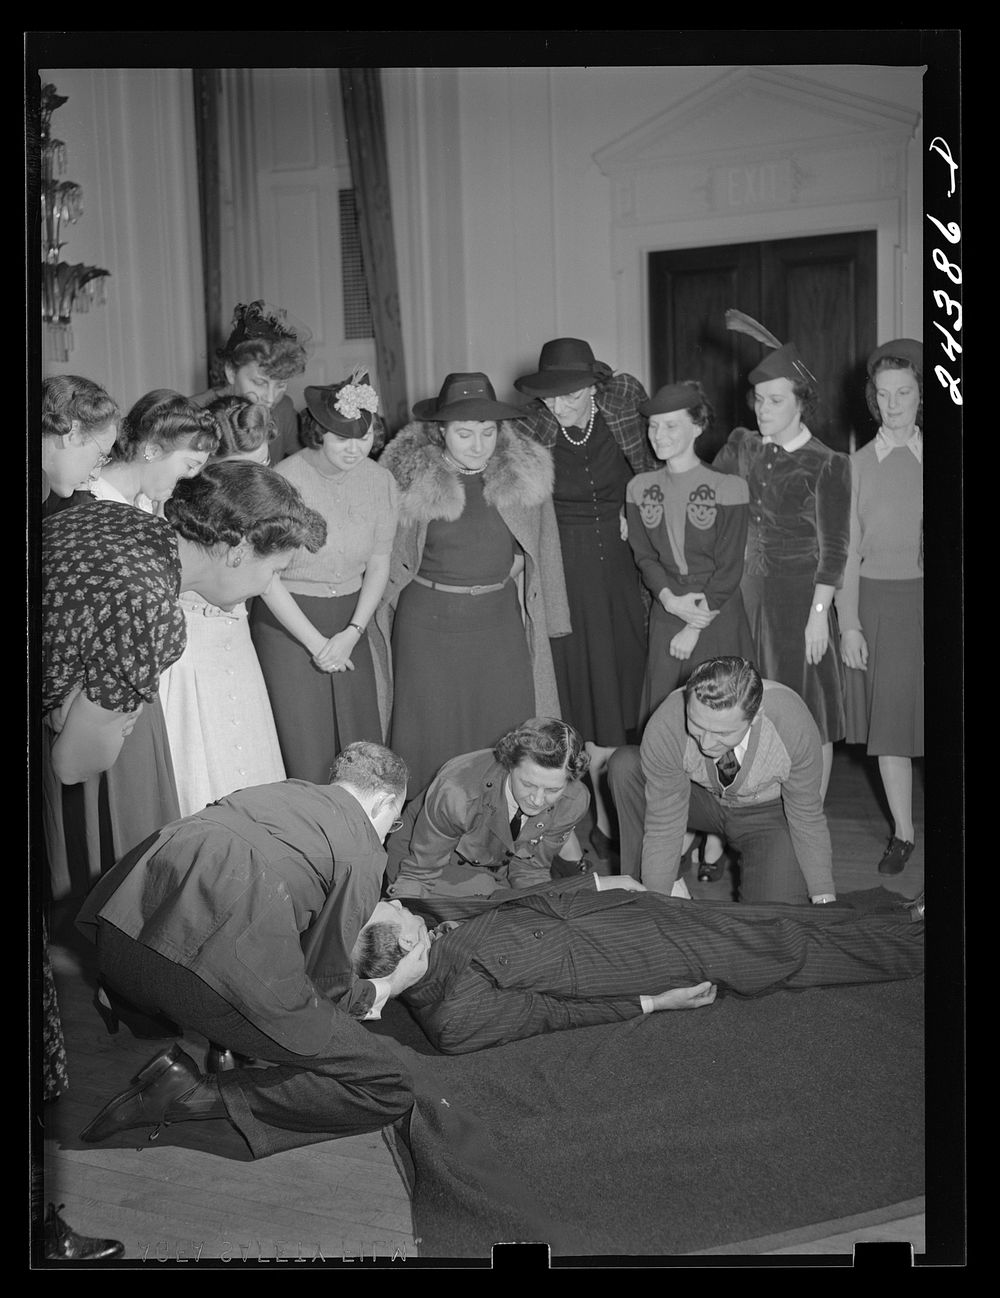 [Untitled photo, possibly related to: Civilian defense volunteers receiving instruction in proper care for man with spine…